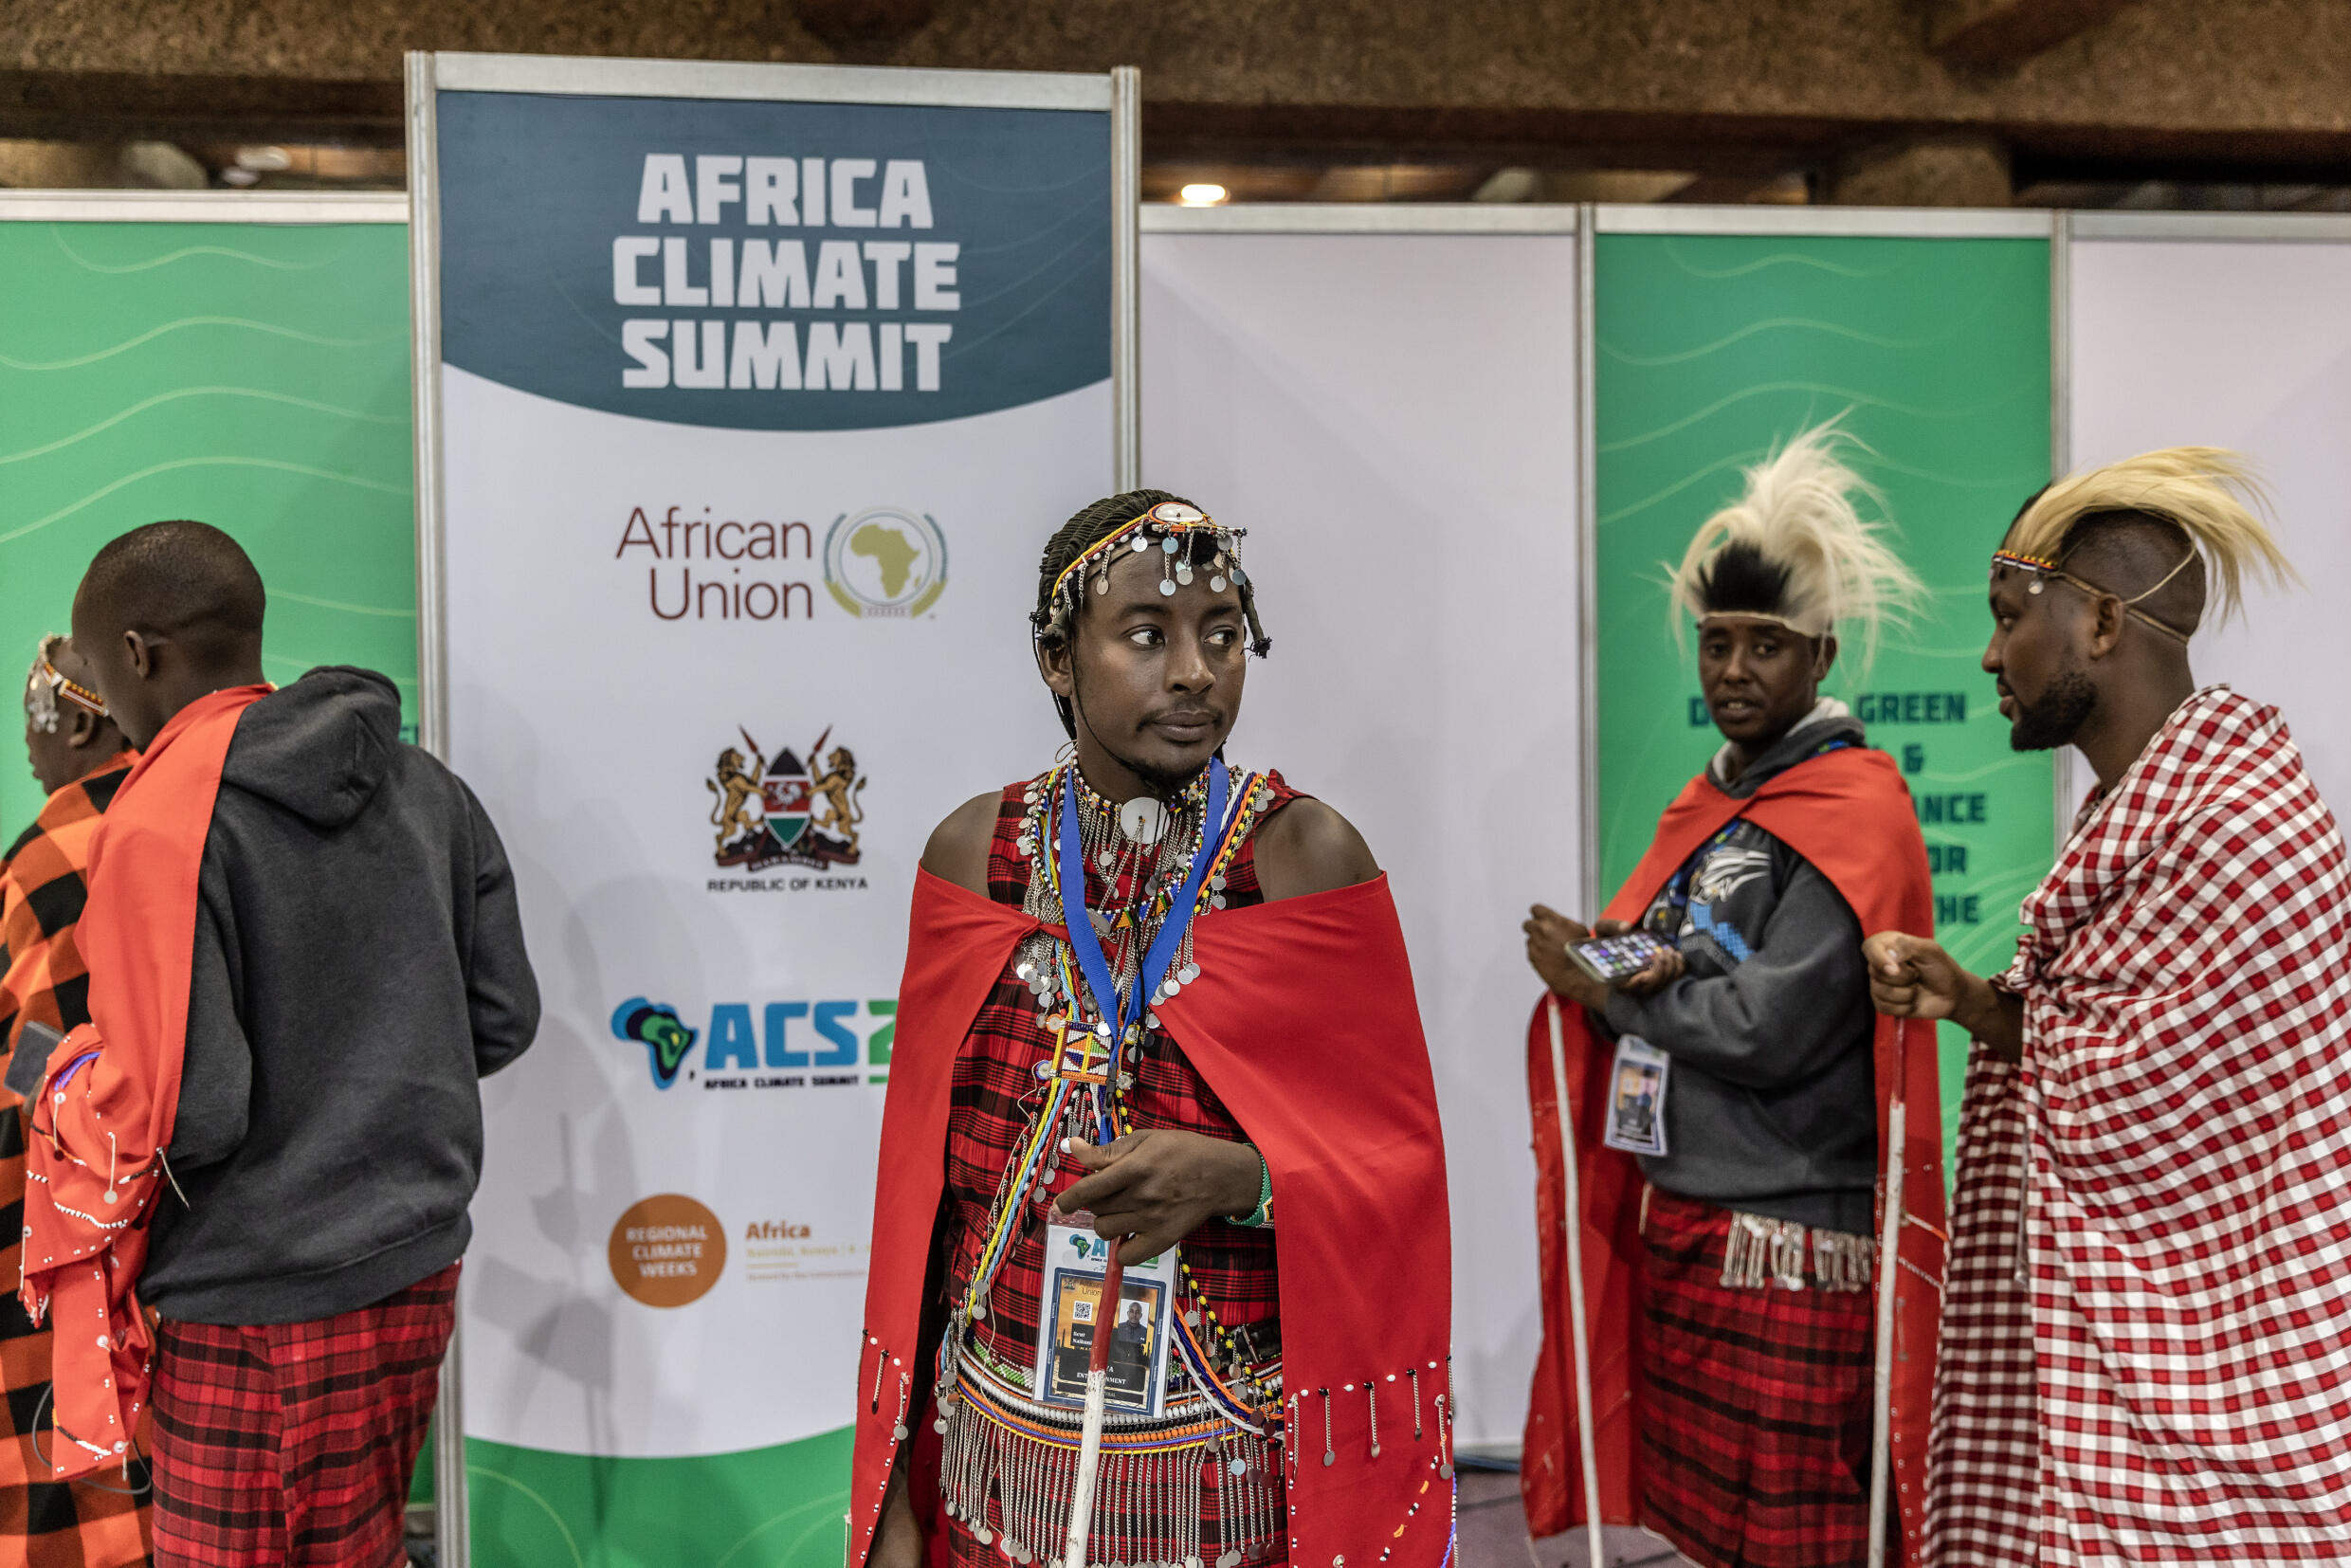 Maasai men stand while waiting for the opening session to start during the Africa Climate Summit 2023 at the Kenyatta International Convention Centre (KICC) in Nairobi on September 5, 2023. Photo: AFP